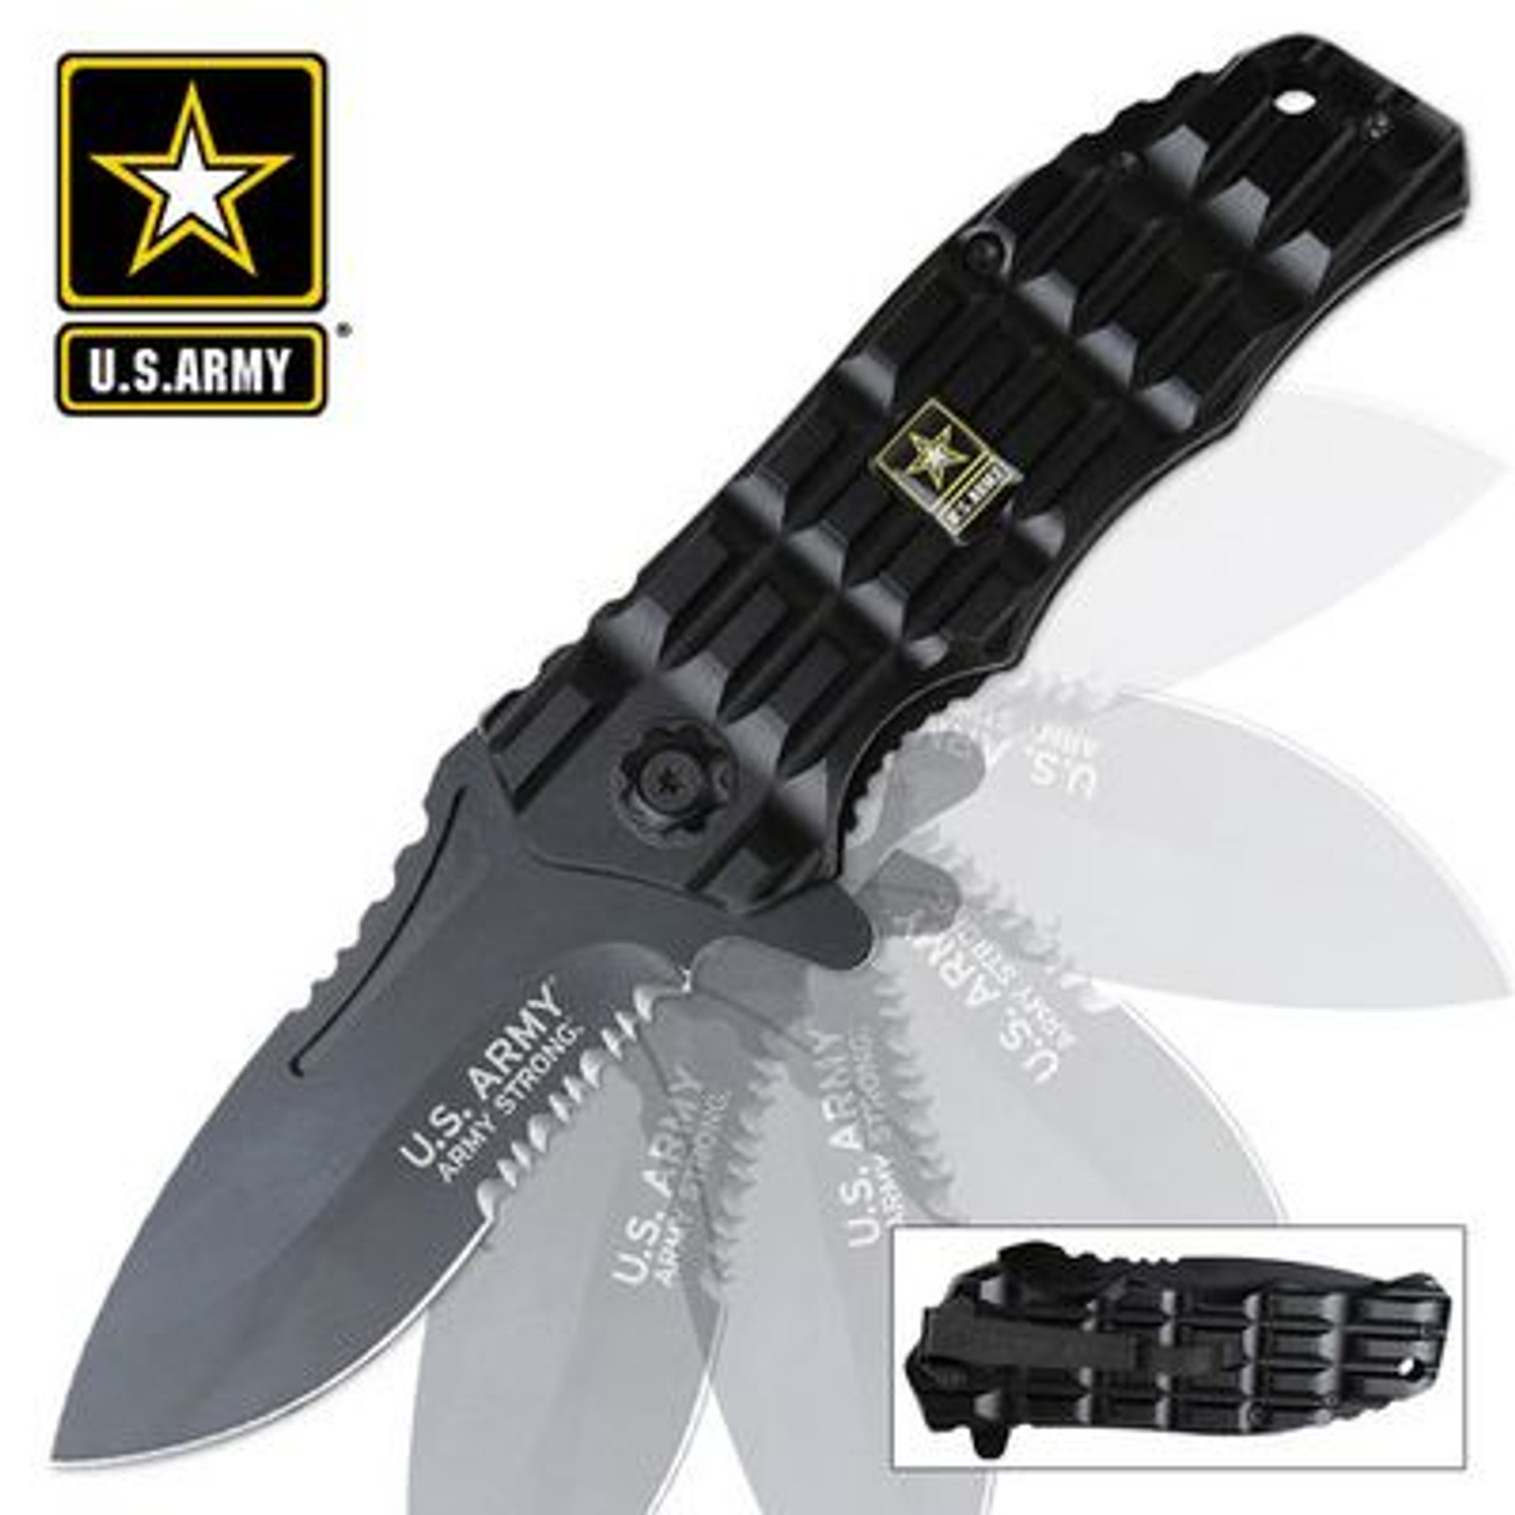 Officially Licensed U.S. Army Tanker Assisted Opening Folding Pocket Knife Black